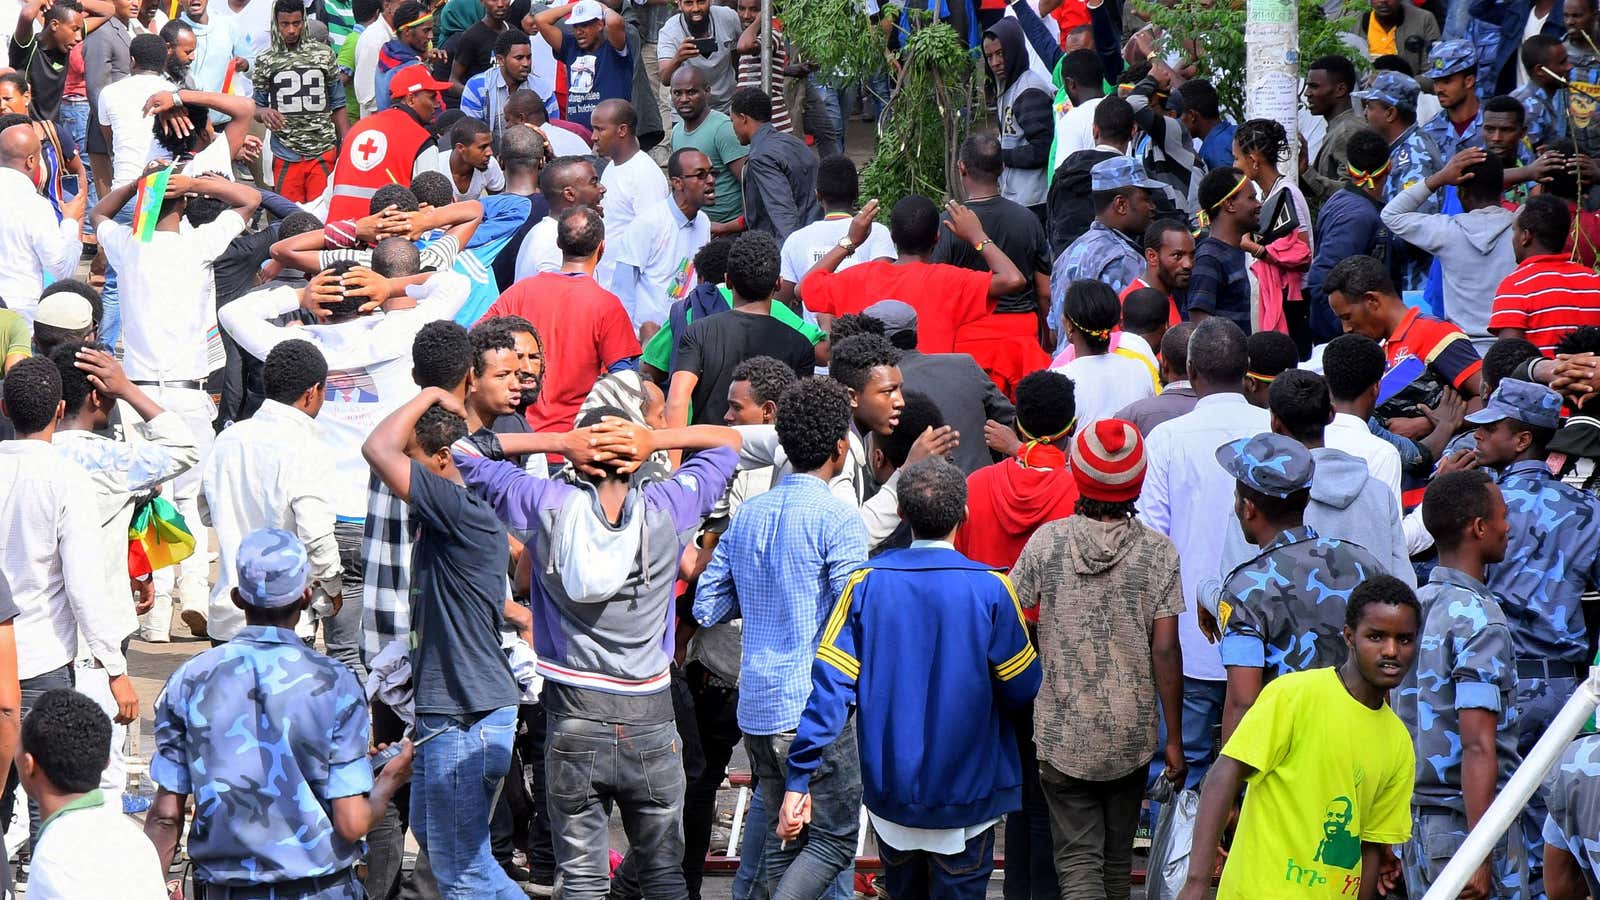 Warning signs: Ethiopians react after an explosion during a rally in support of the new prime minister Abiy Ahmed in Addis Ababa in June